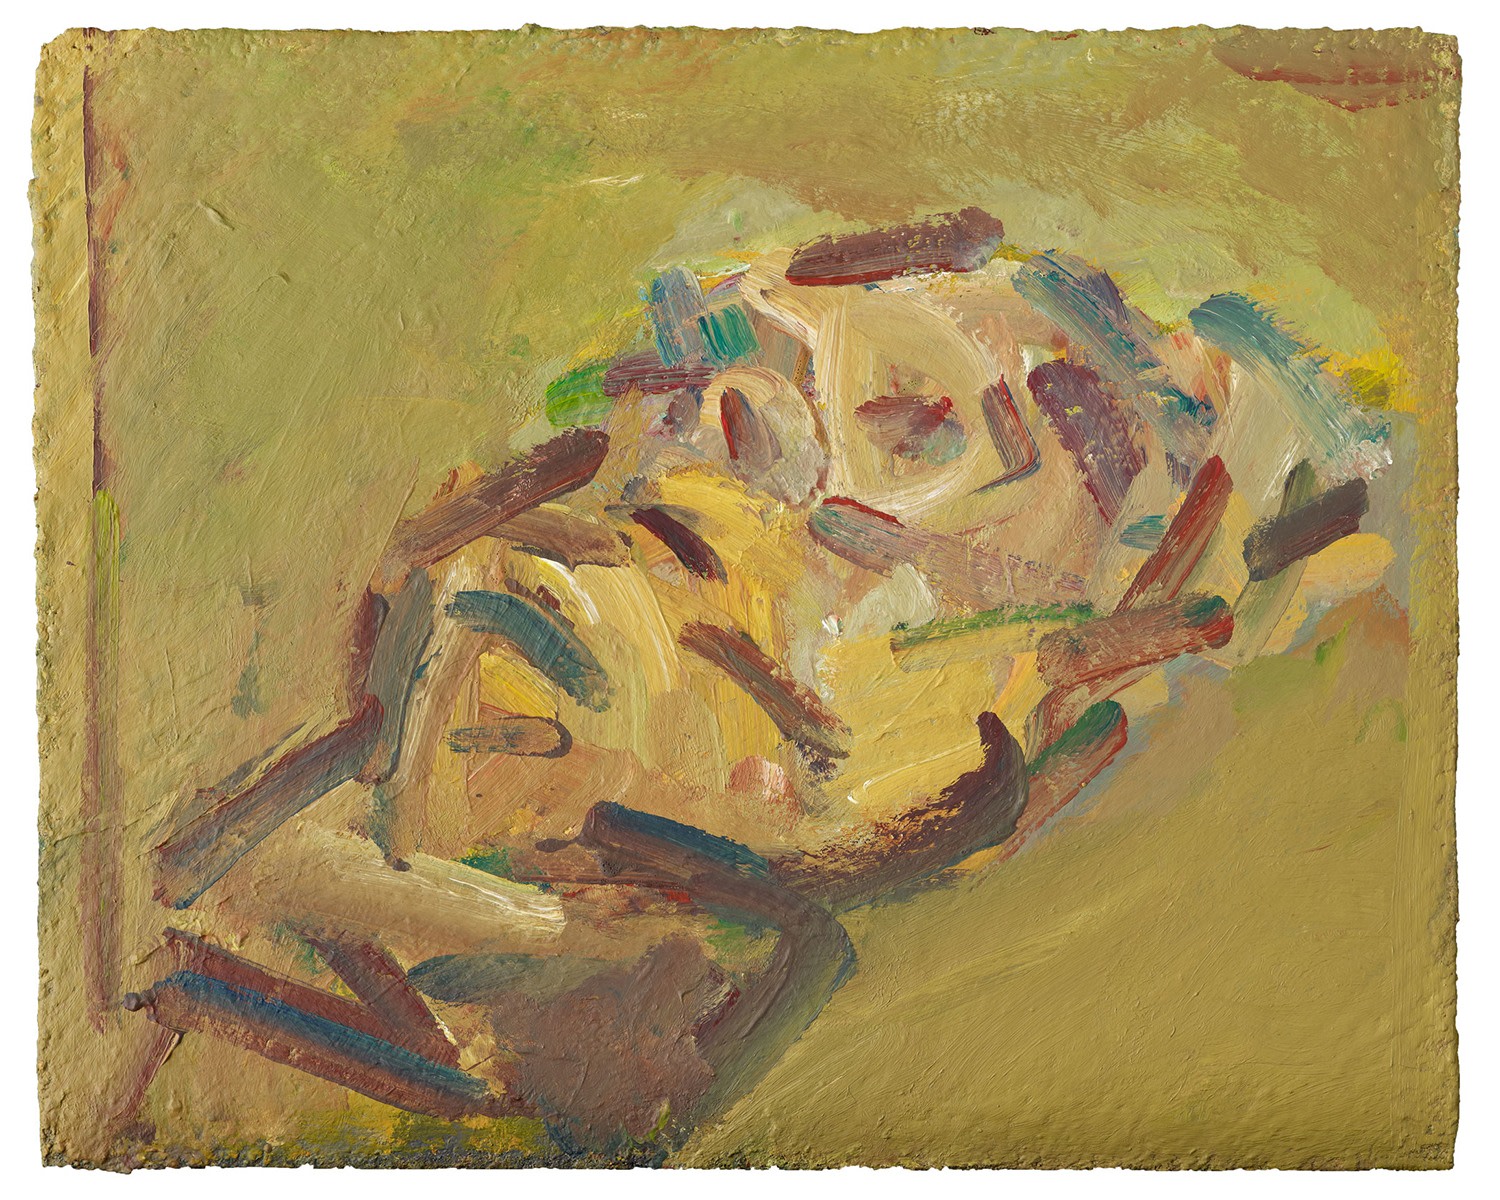 Oil painting of a reclining face on ochre background